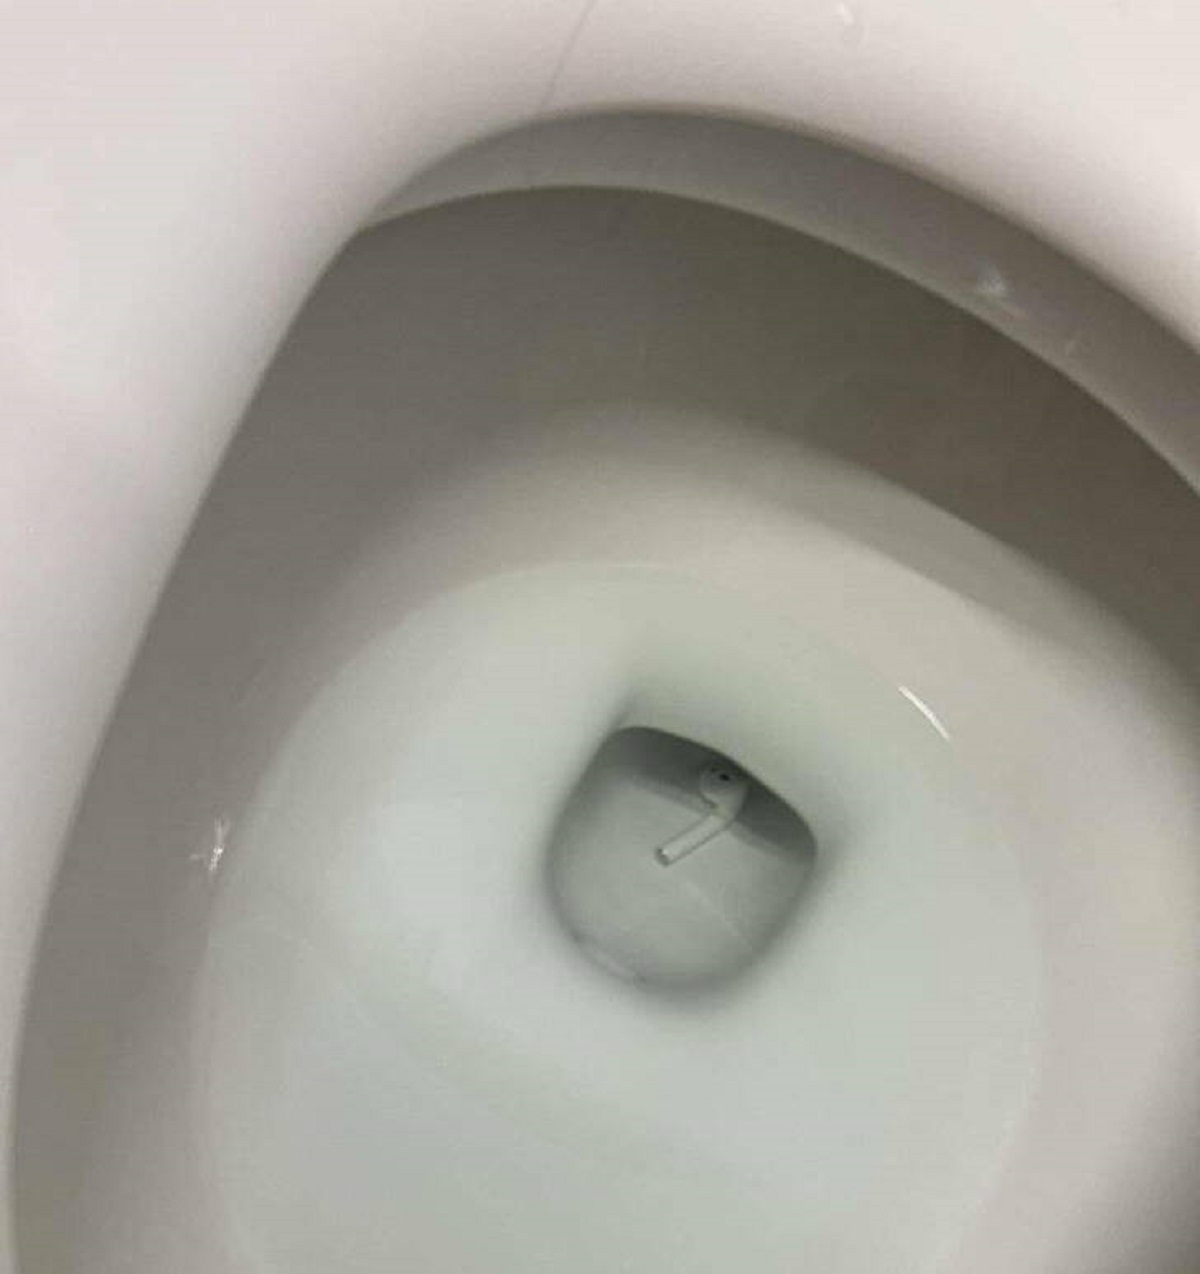 “Donating blood today, used the bathroom and this happened.”